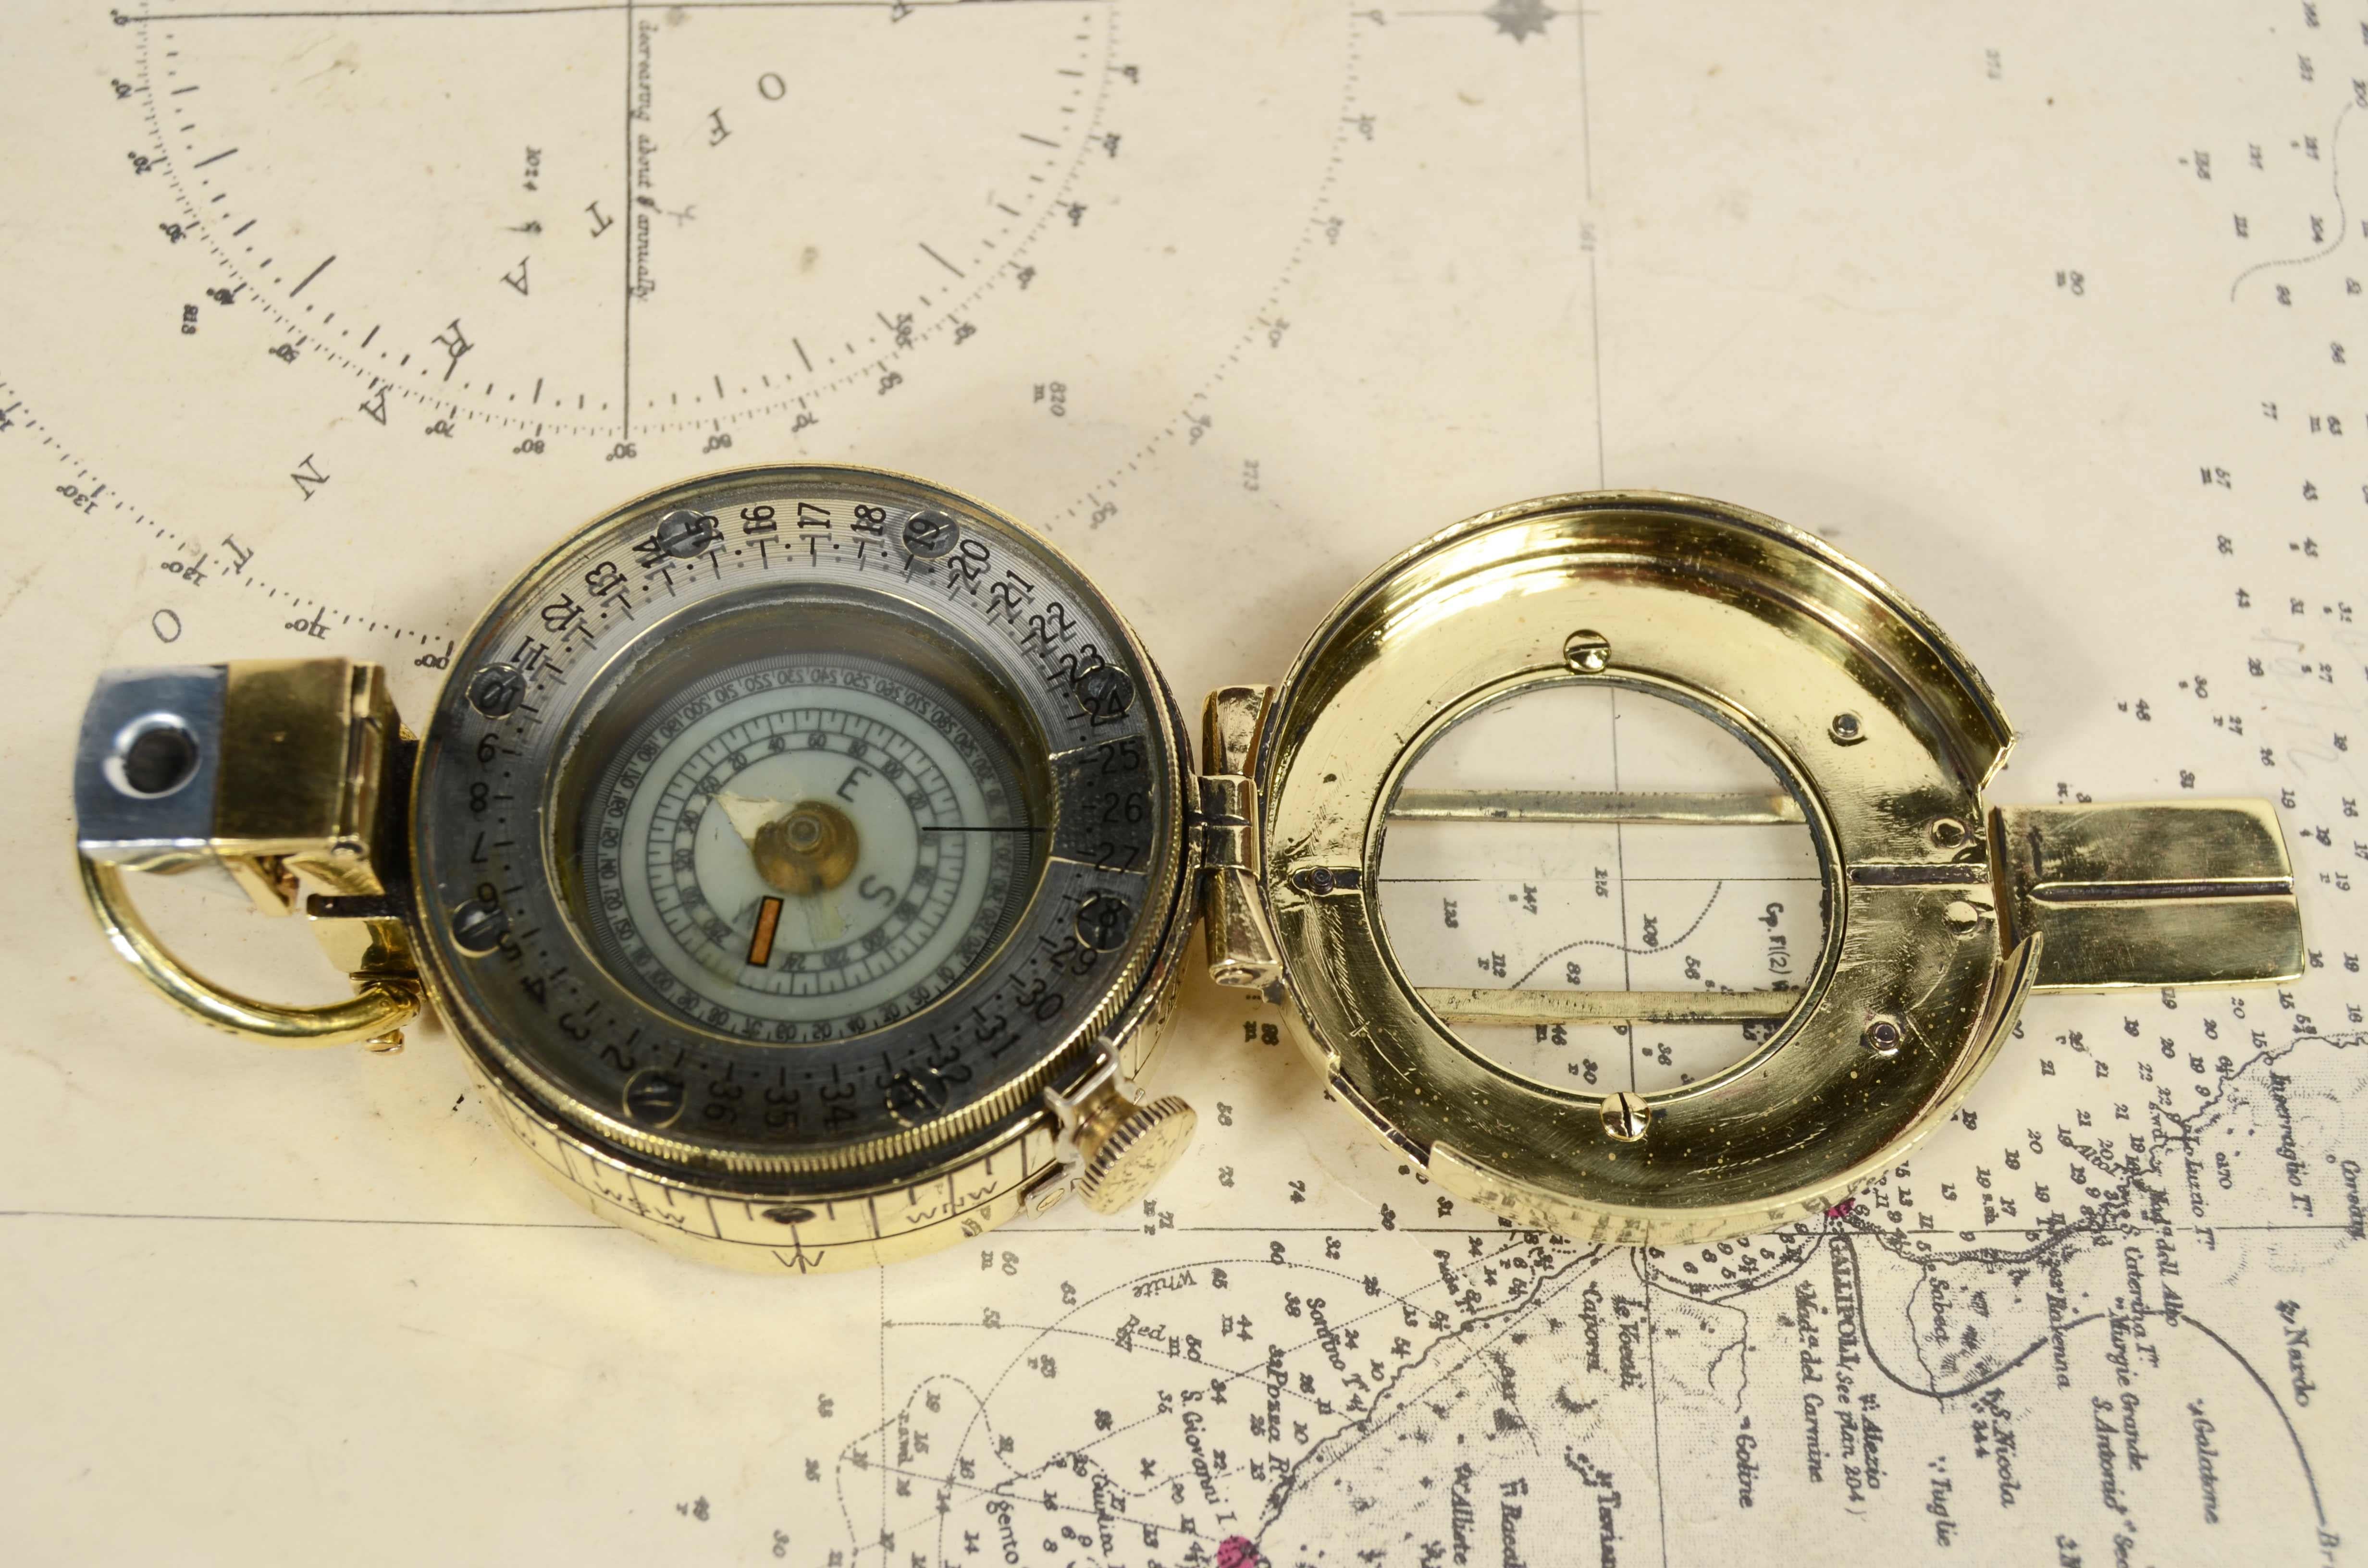 Prismatic compass  by detection signed T.G. Co Ltd London no. B 21681 1940 MK For Sale 3